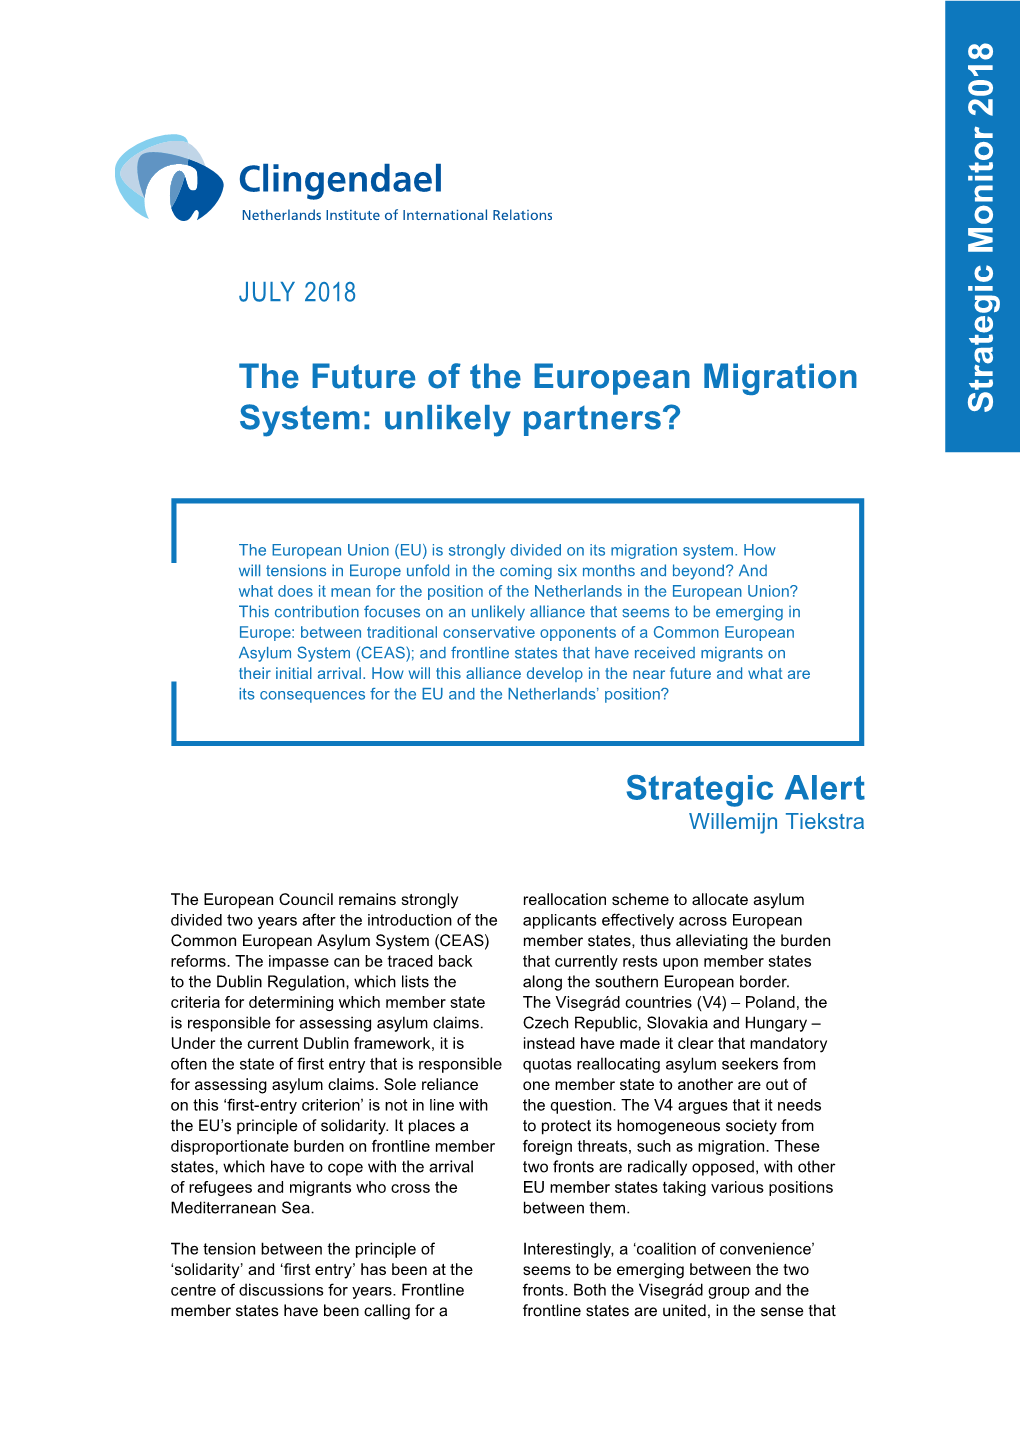 The Future of the European Migration System: Unlikely Partners? Strategic Monitor 2018